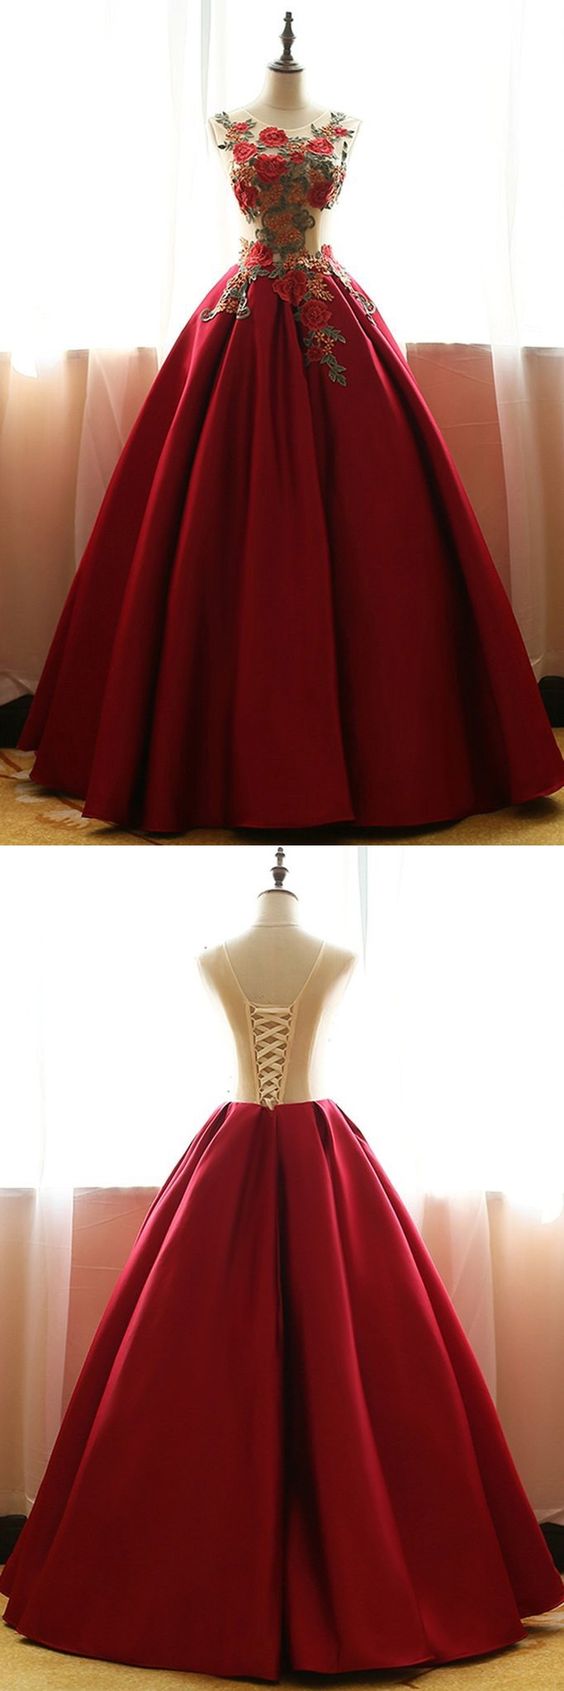 Red Quinceanera Dresses Floral Round Neck A-line Satin Applique Ball Gown M1095